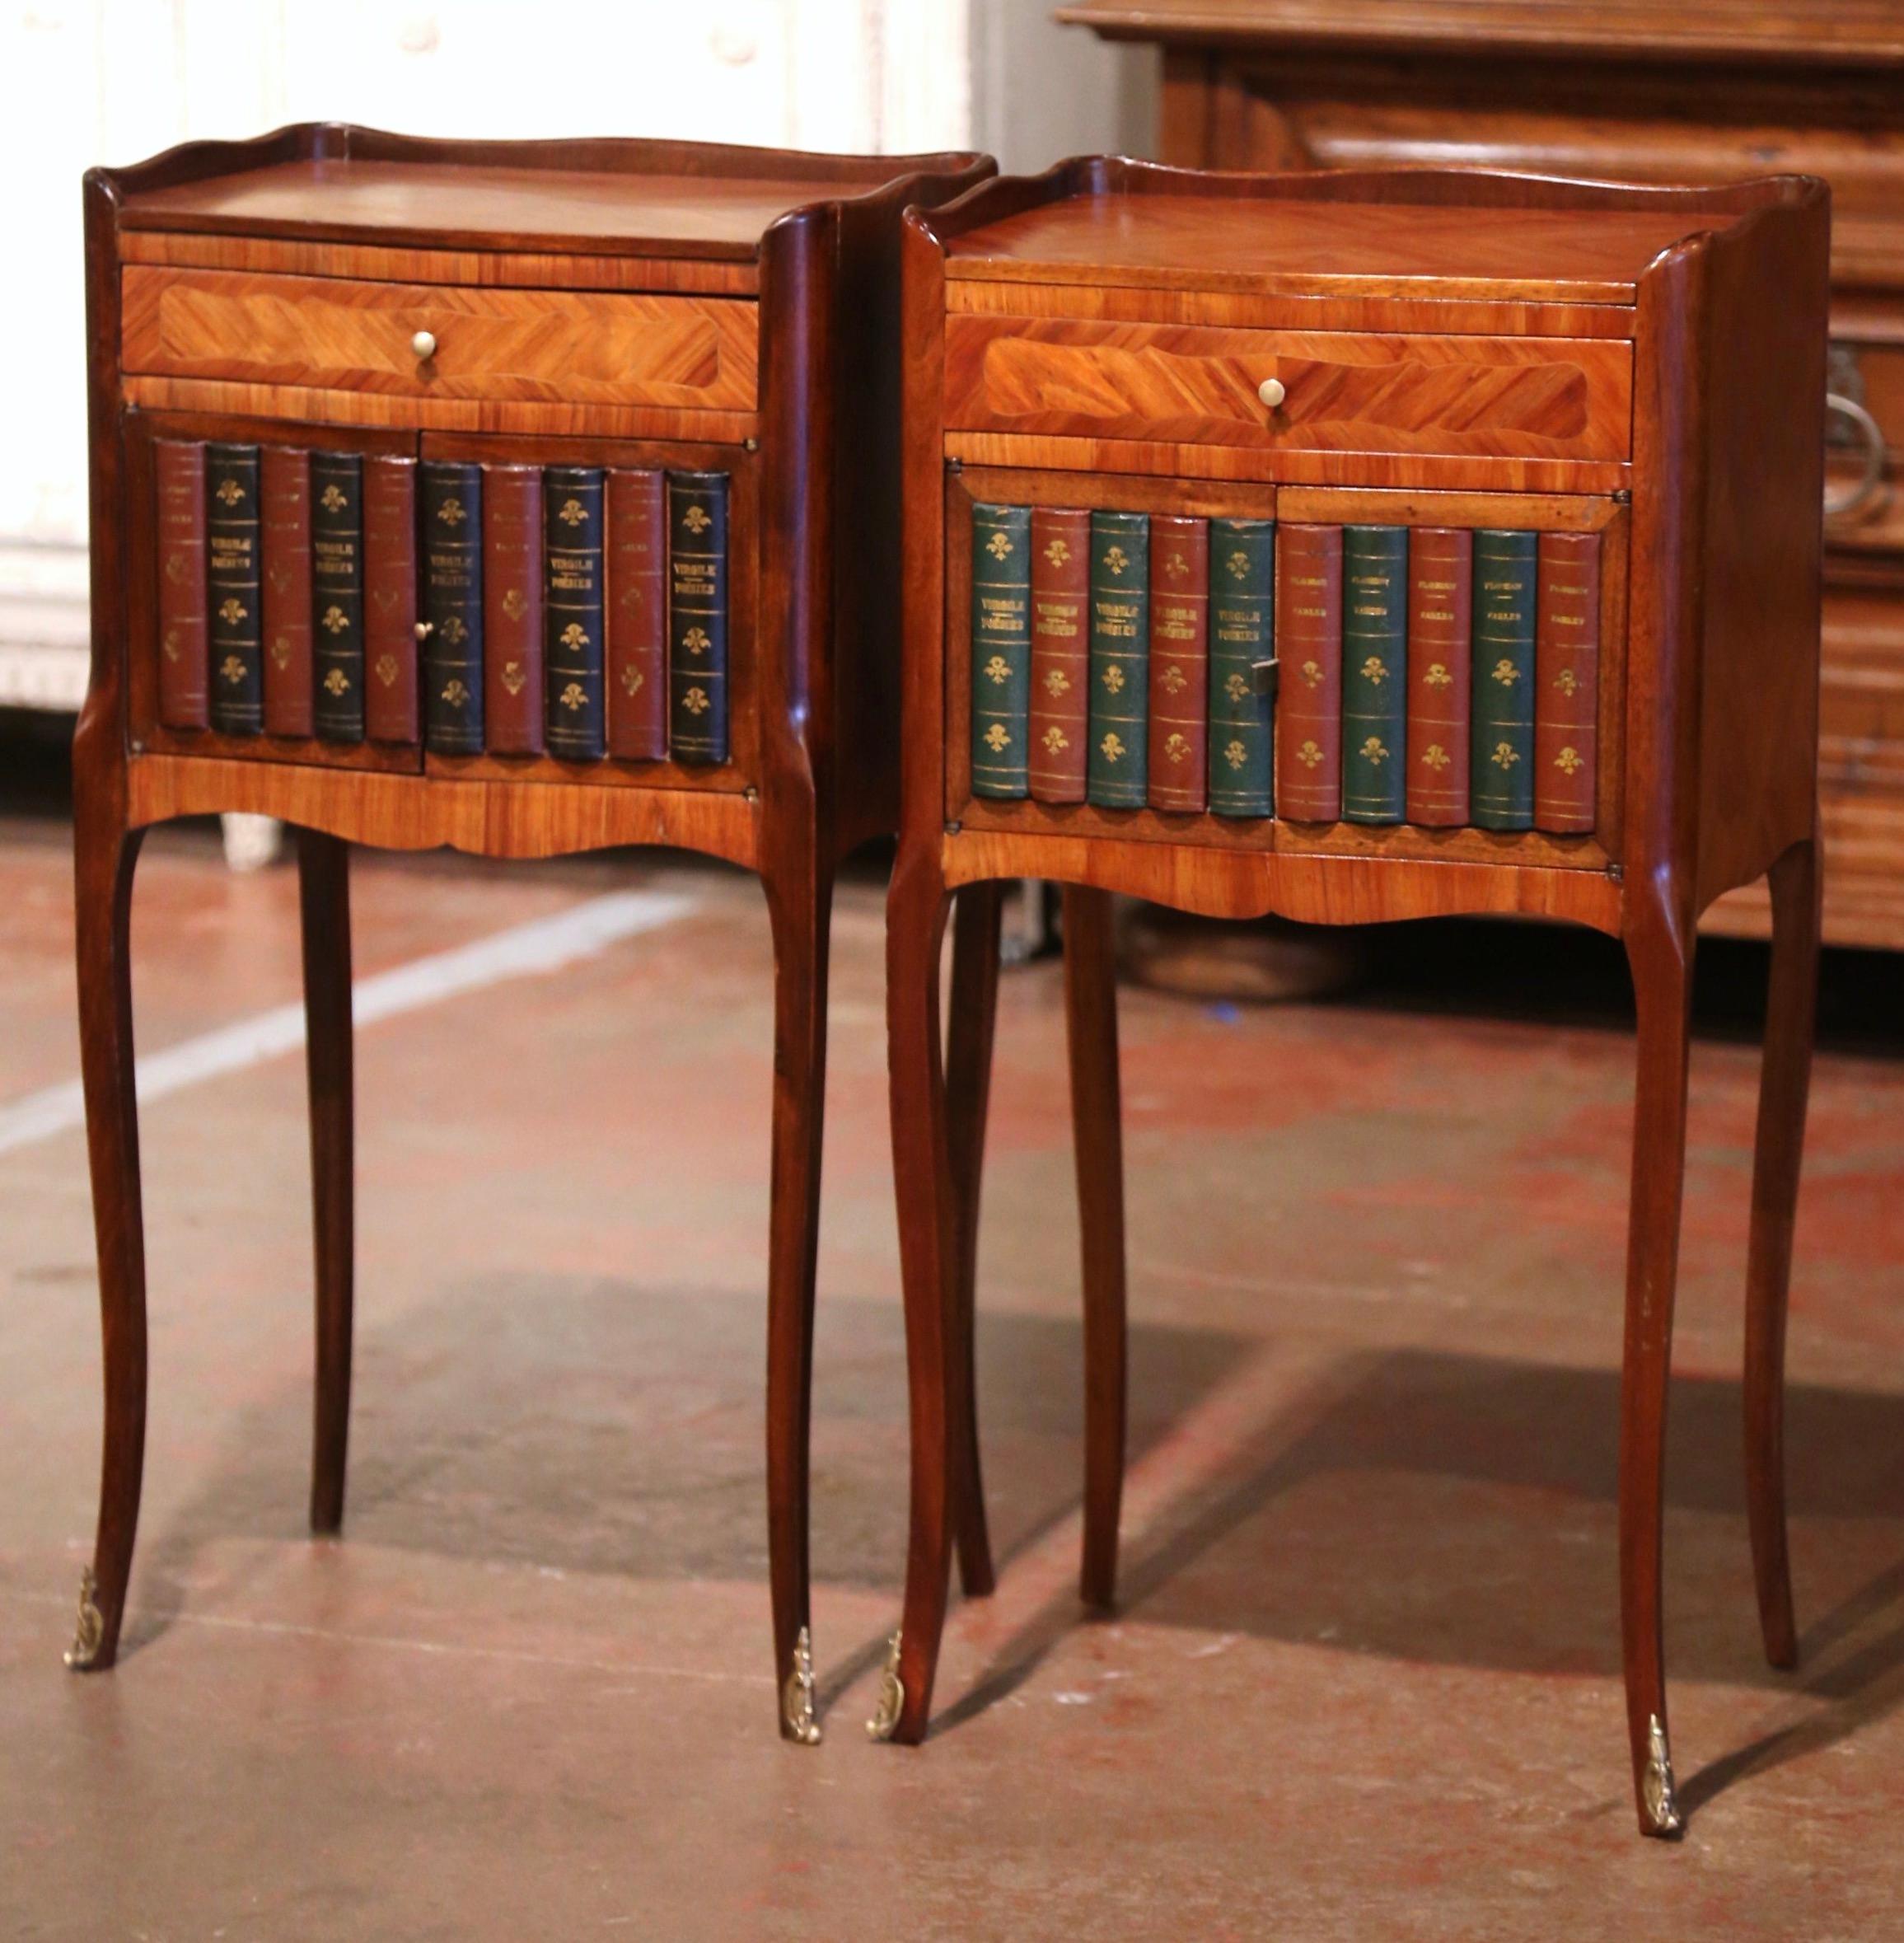 Hand-Carved Pair of 19th Century French Walnut Nightstands with Leather Book Spine Doors For Sale